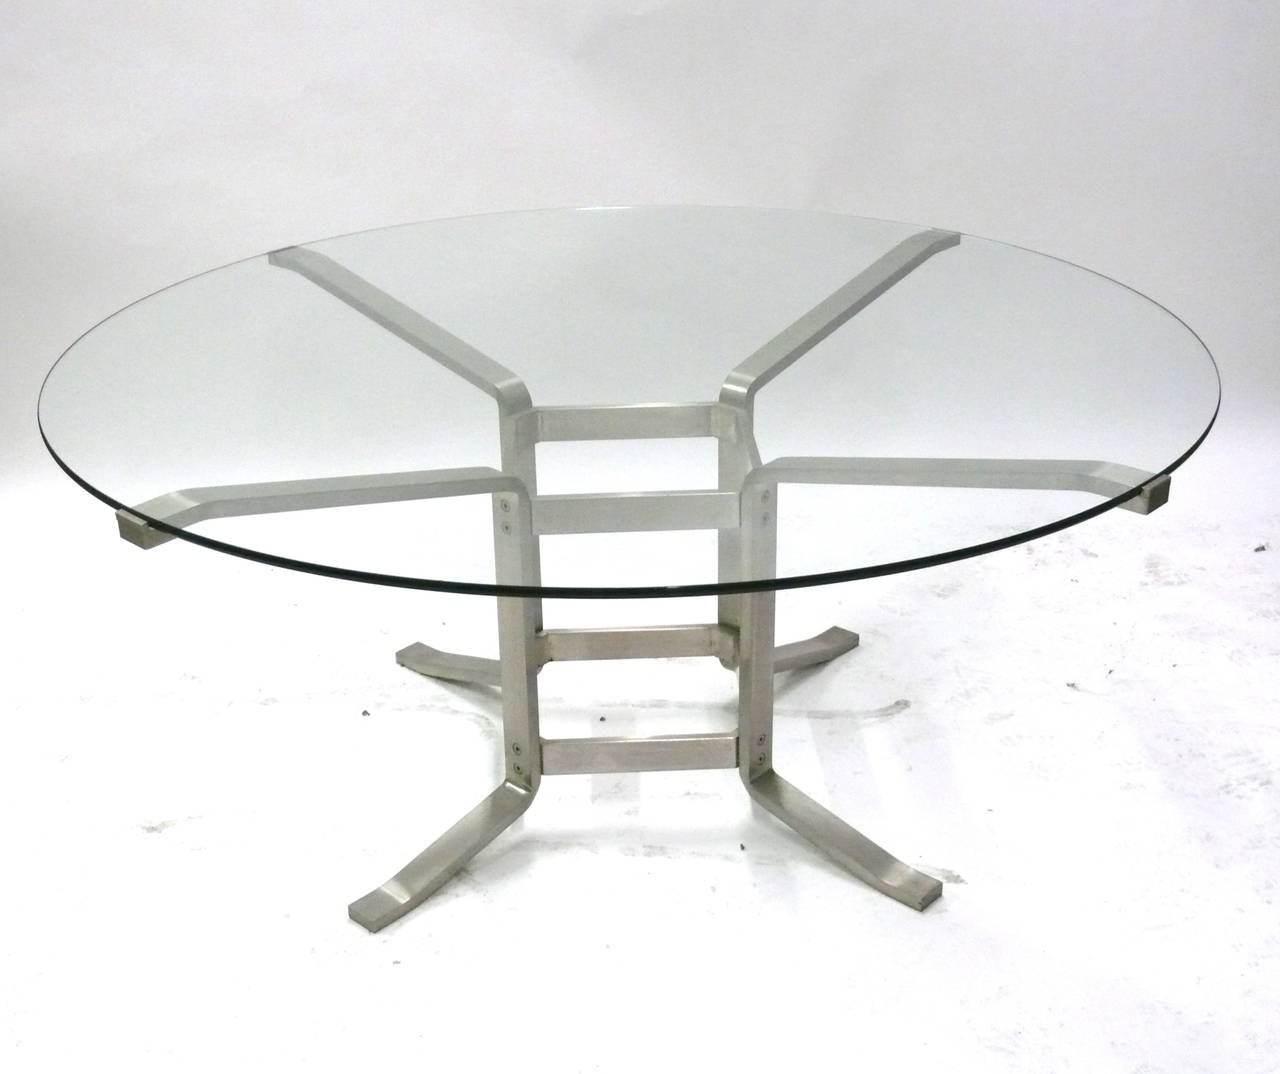 One of a kind Italian table constructed of solid stainless steel. Table features a round glass top that fits securely within the four steel arms branching out from its base. Incredibly heavy construction and beautiful design. Perfect for the foyer